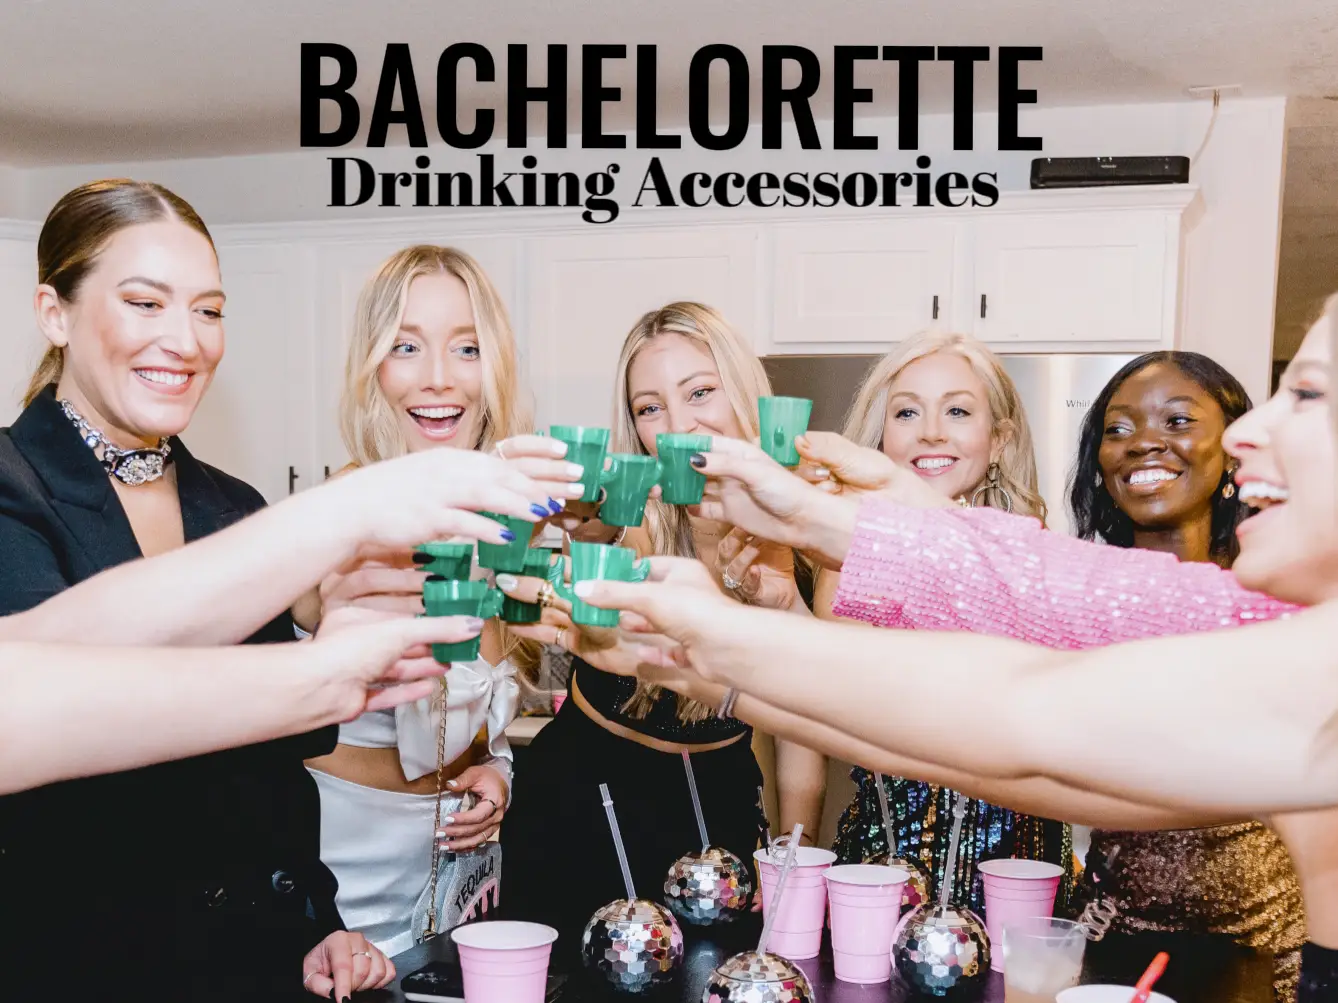 Bachelorette Drinking Accessories  Gallery posted by Alyssa Belz